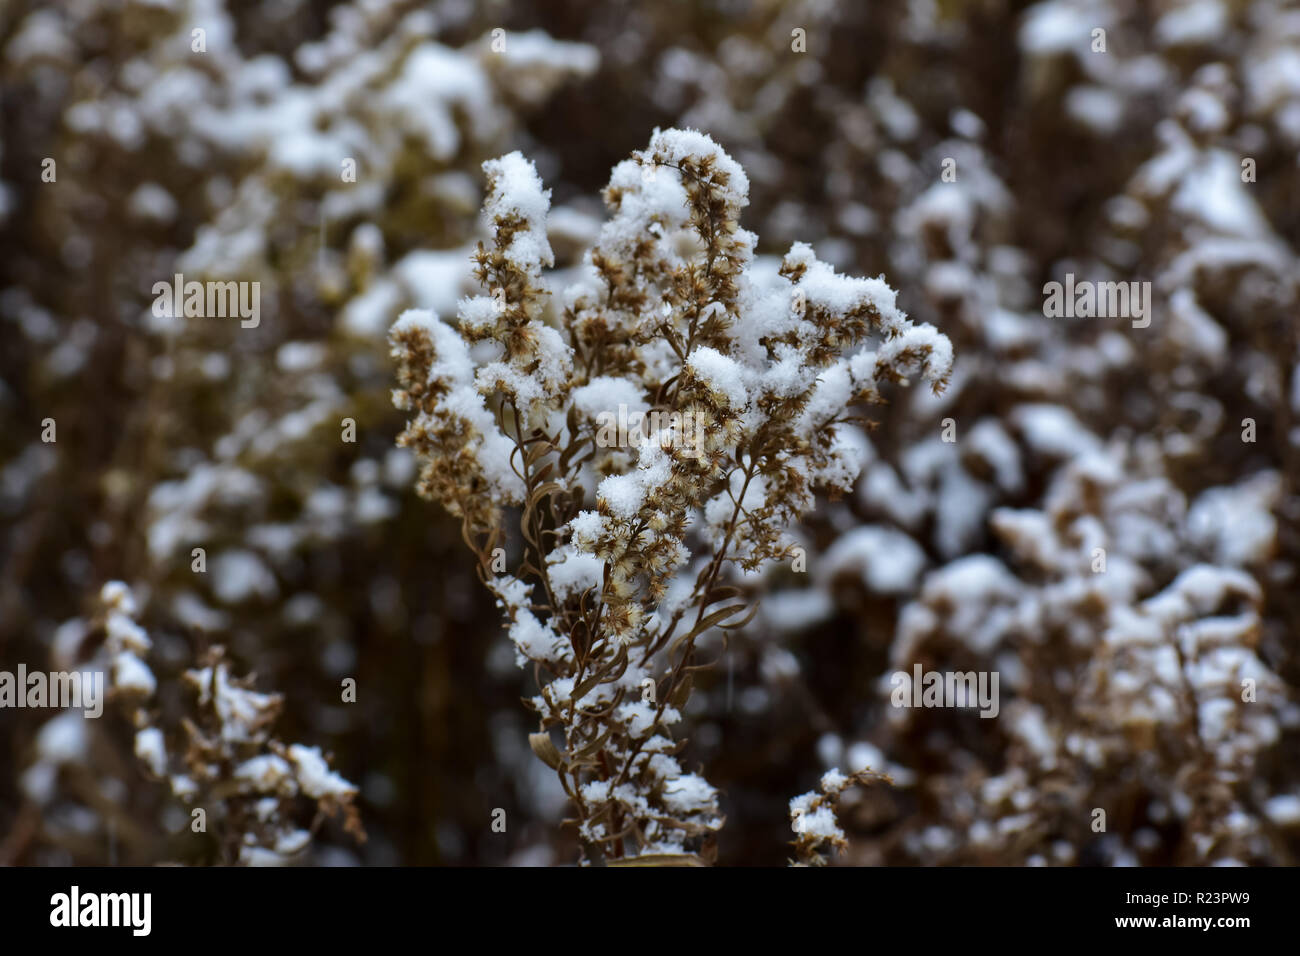 Snow covered plant. During the first snowstorm I took a walk once it was a light snow. The plants were still standing since it was the first storm. Stock Photo